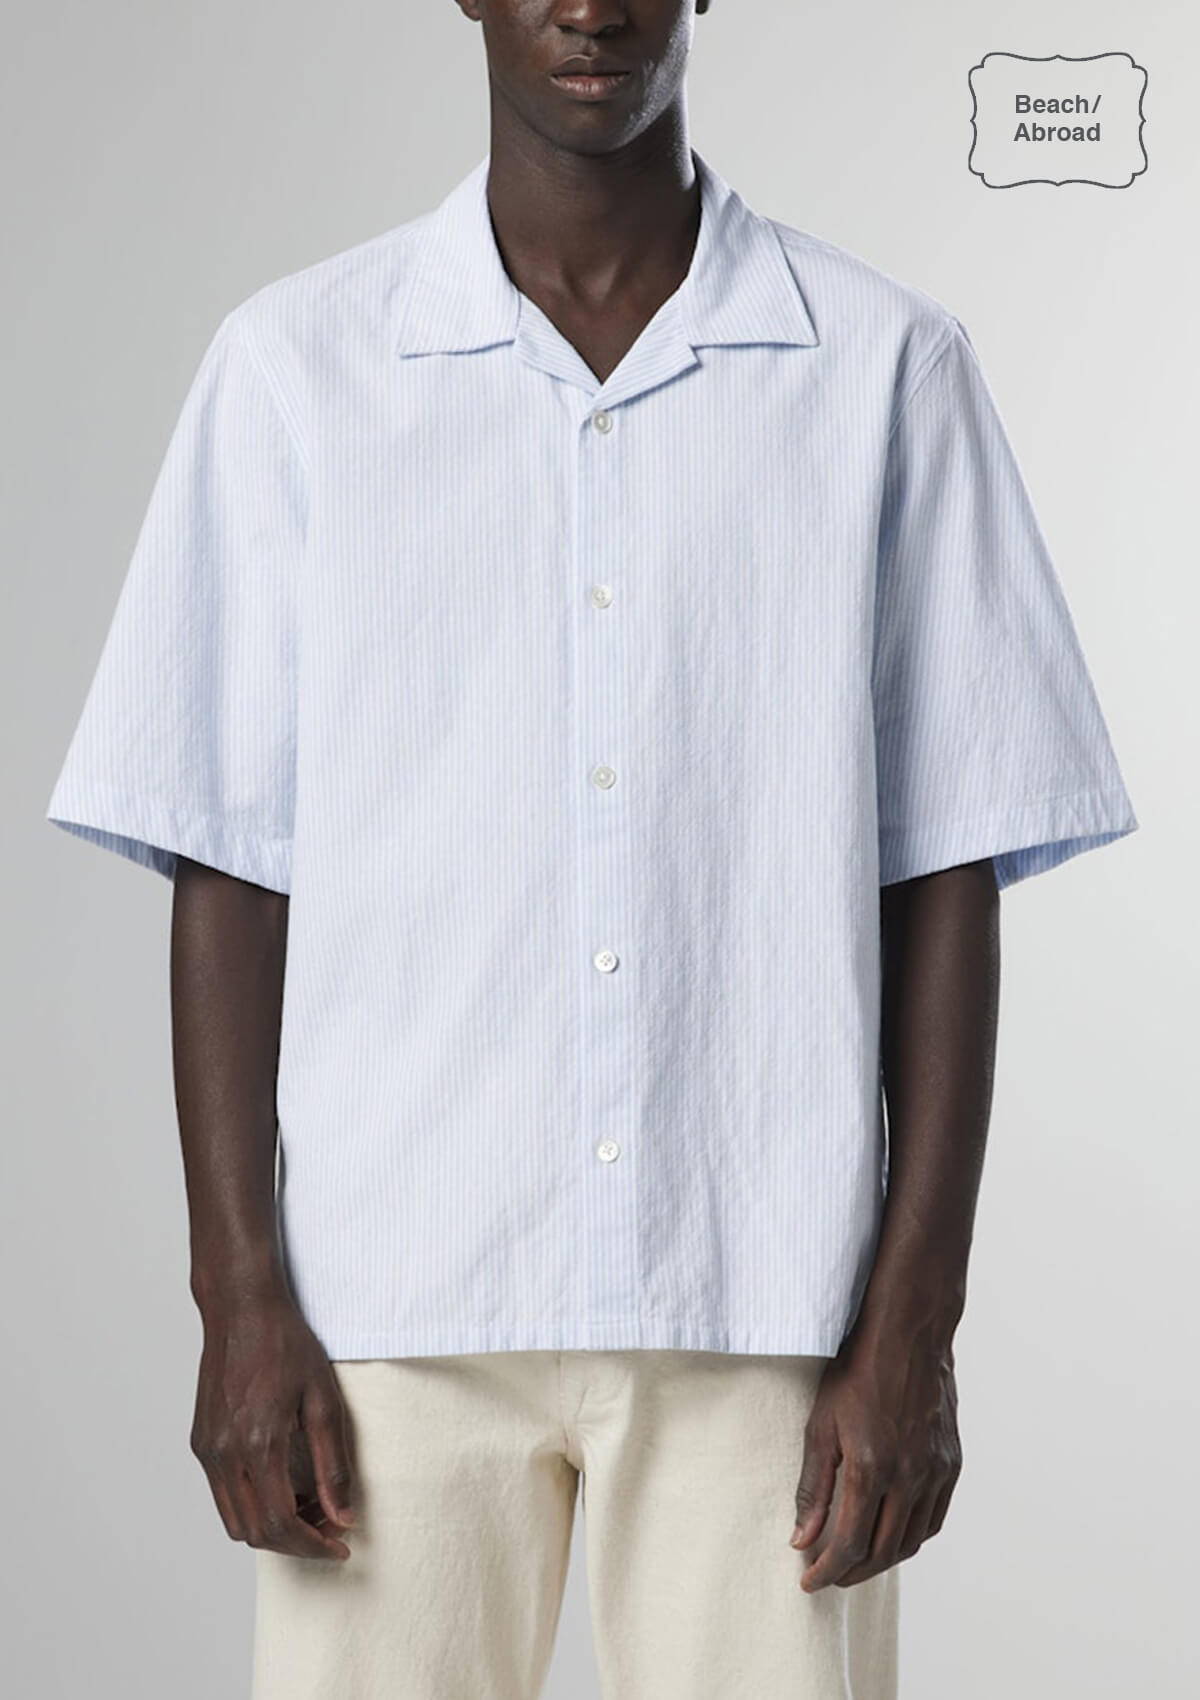 A look book image of a model wearing the NN07 Ole Short Sleeve Shirt in blue stripe.